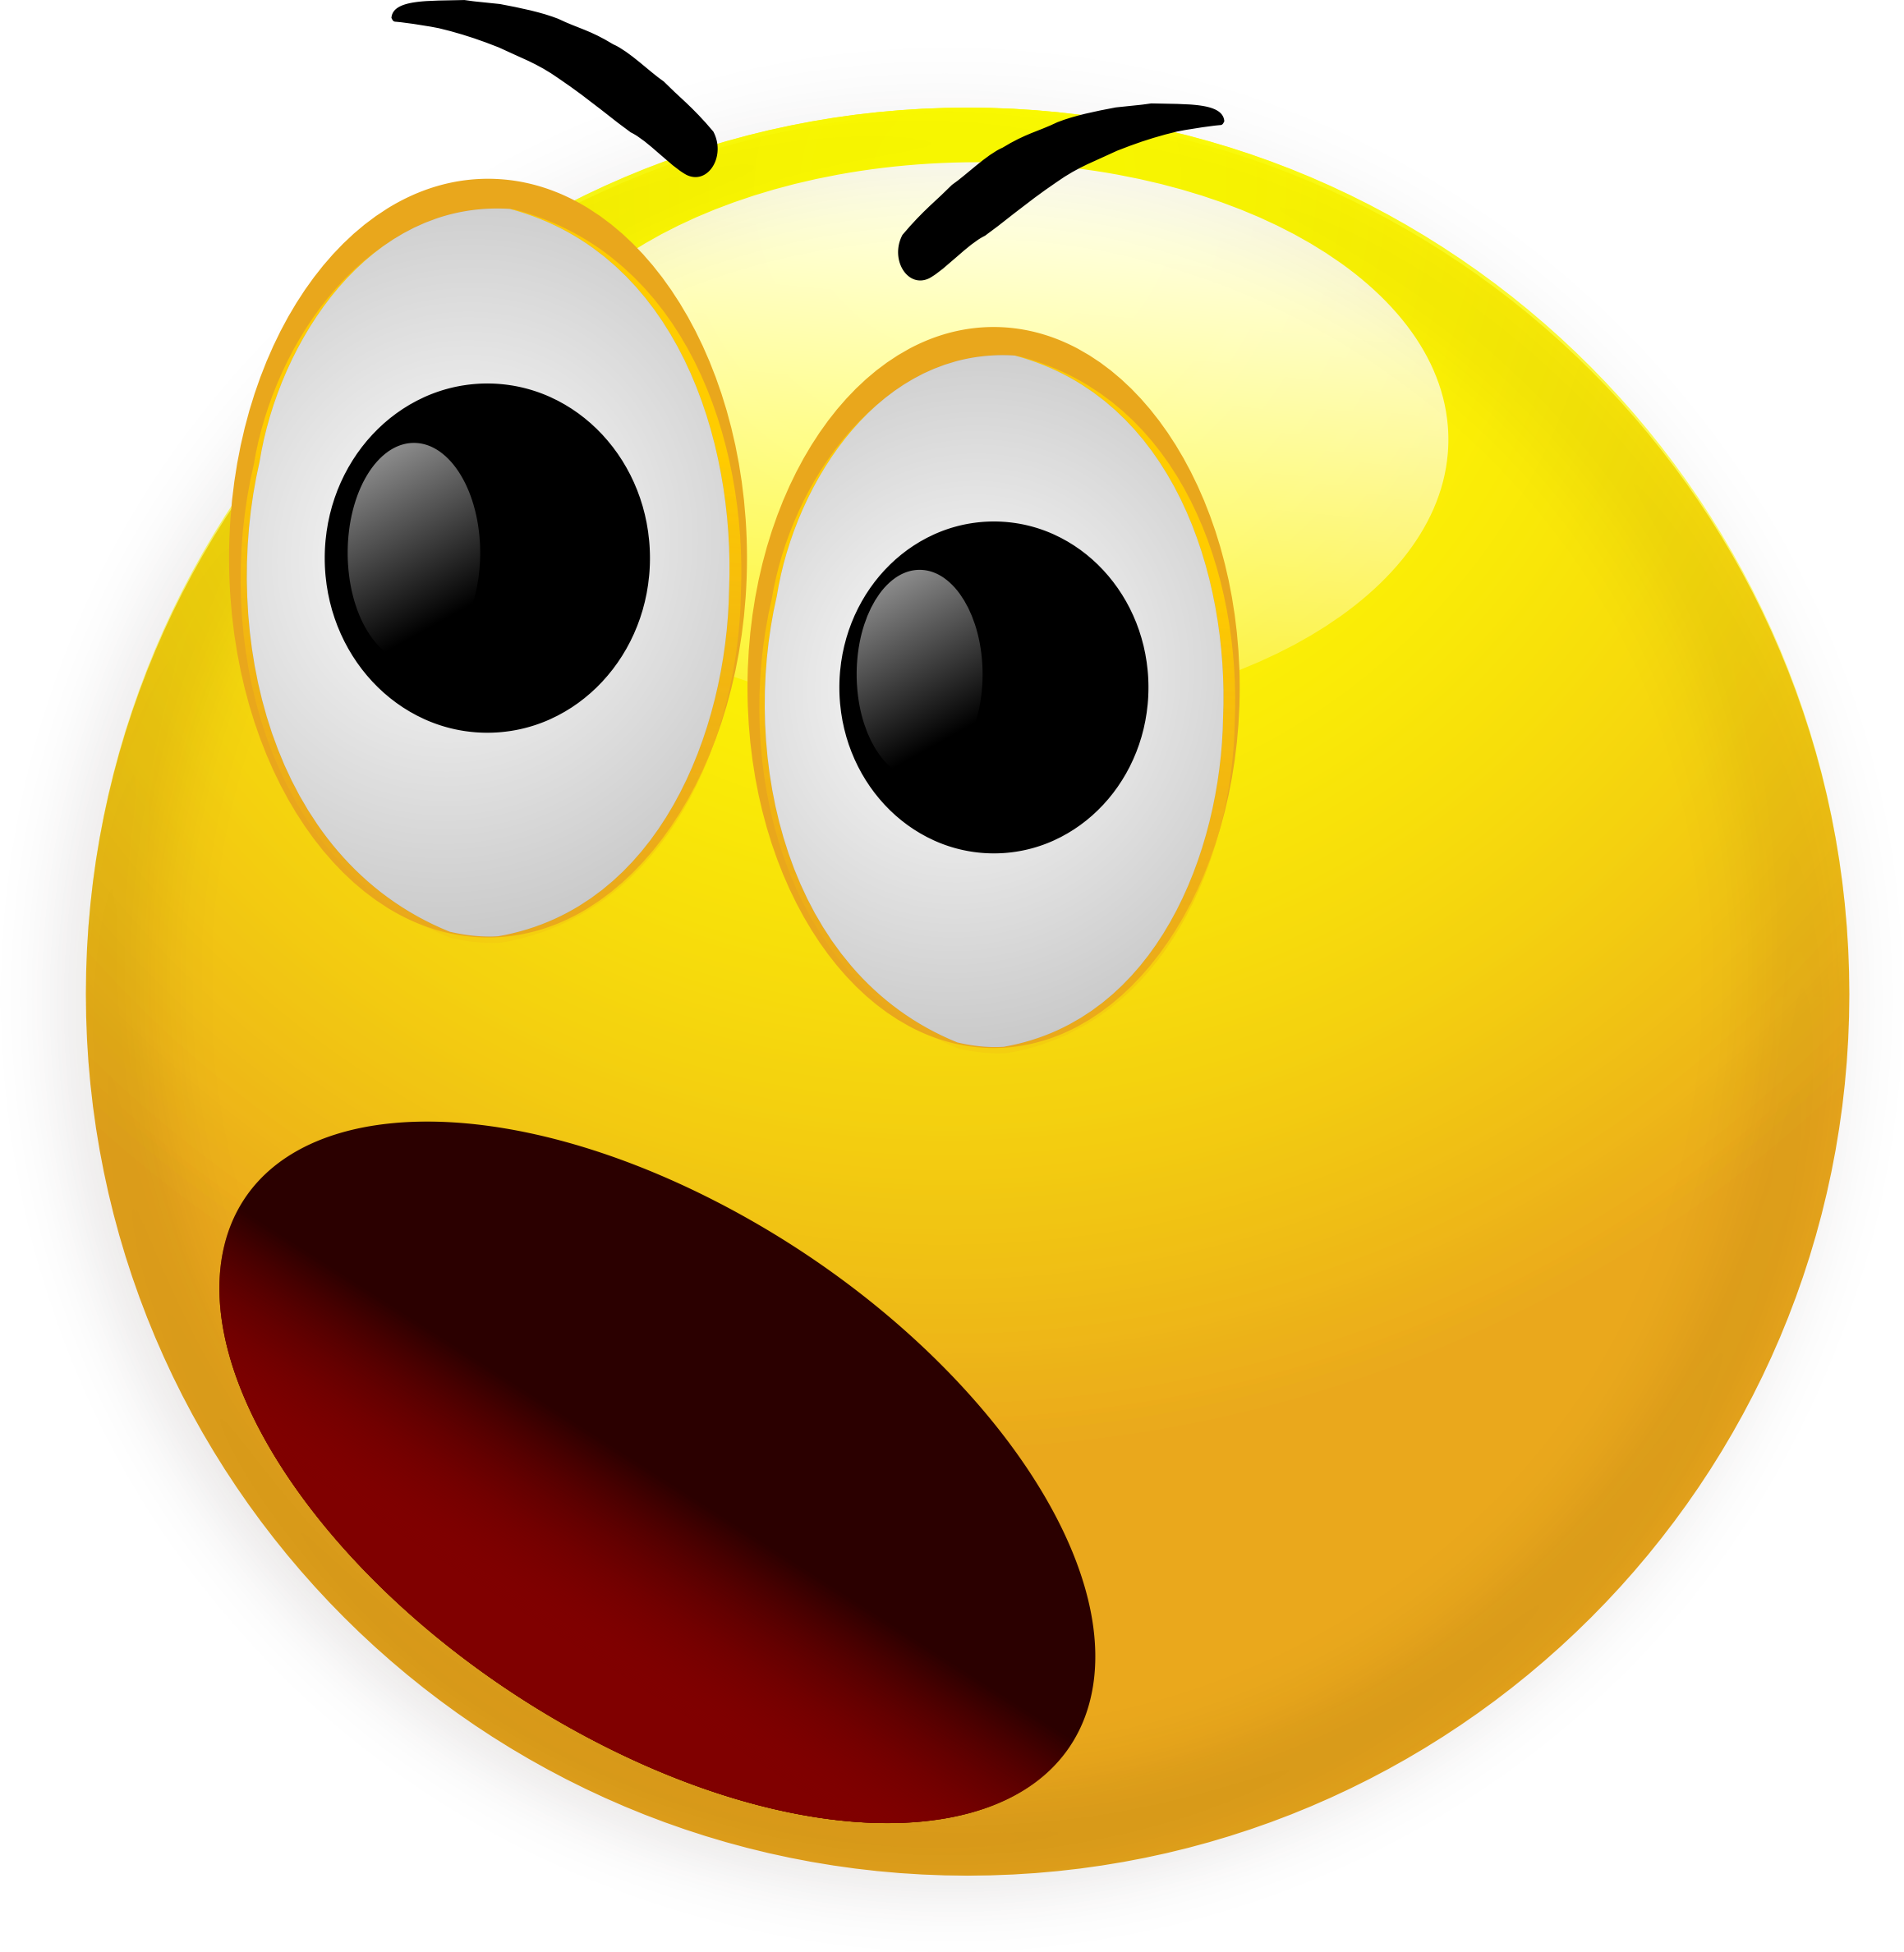 Free Shocked Smiley High Resolution Clip Art All Free Picture